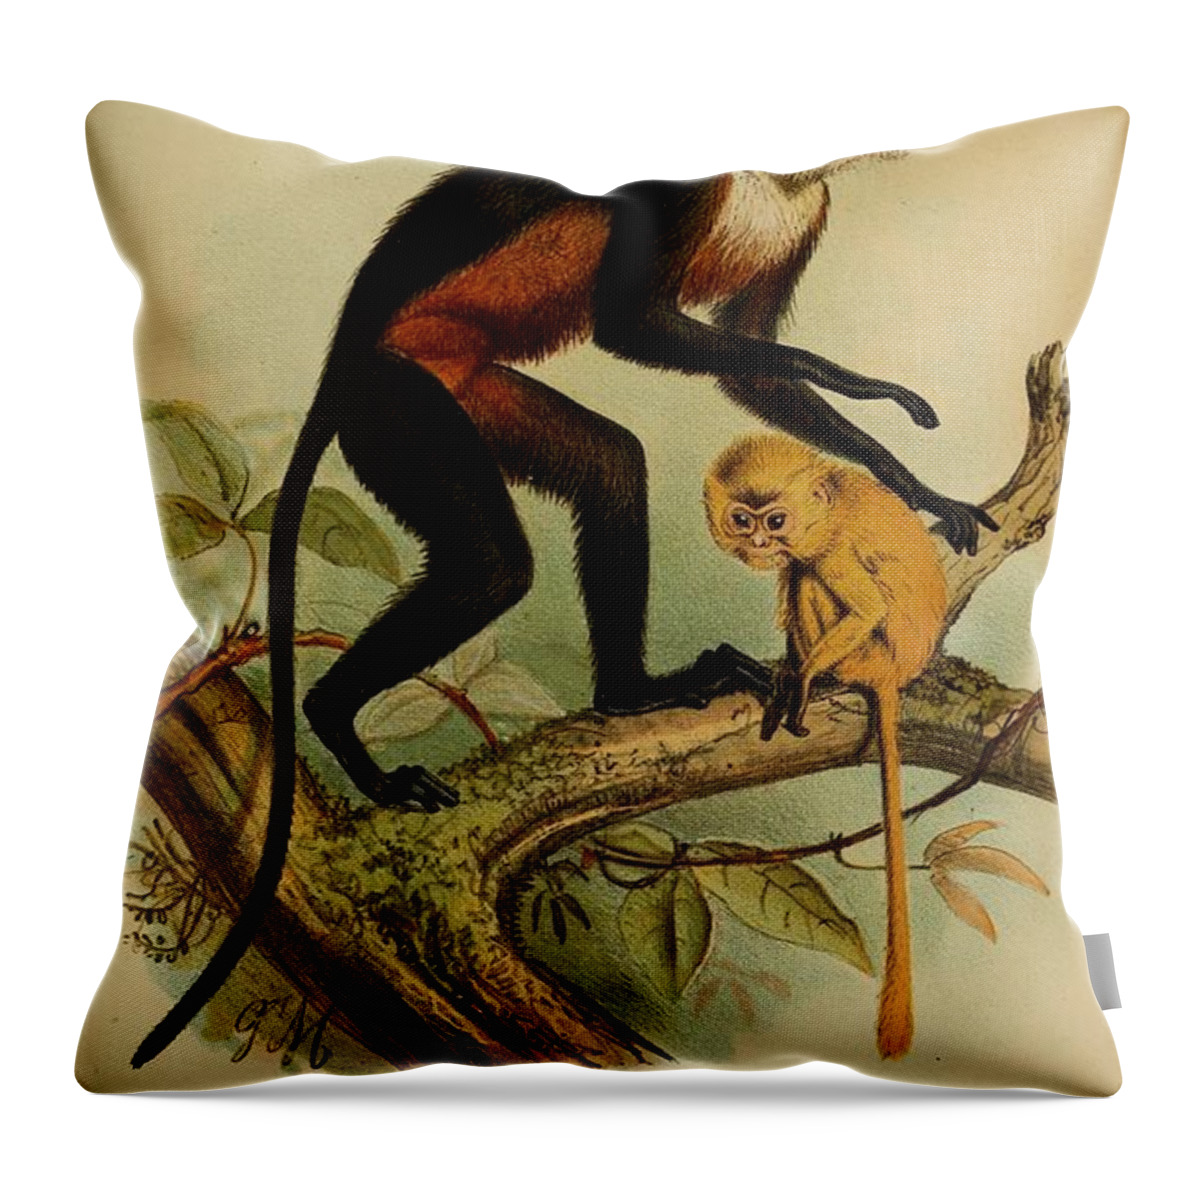 John Throw Pillow featuring the mixed media Beautiful Antique Monkey by World Art Collective